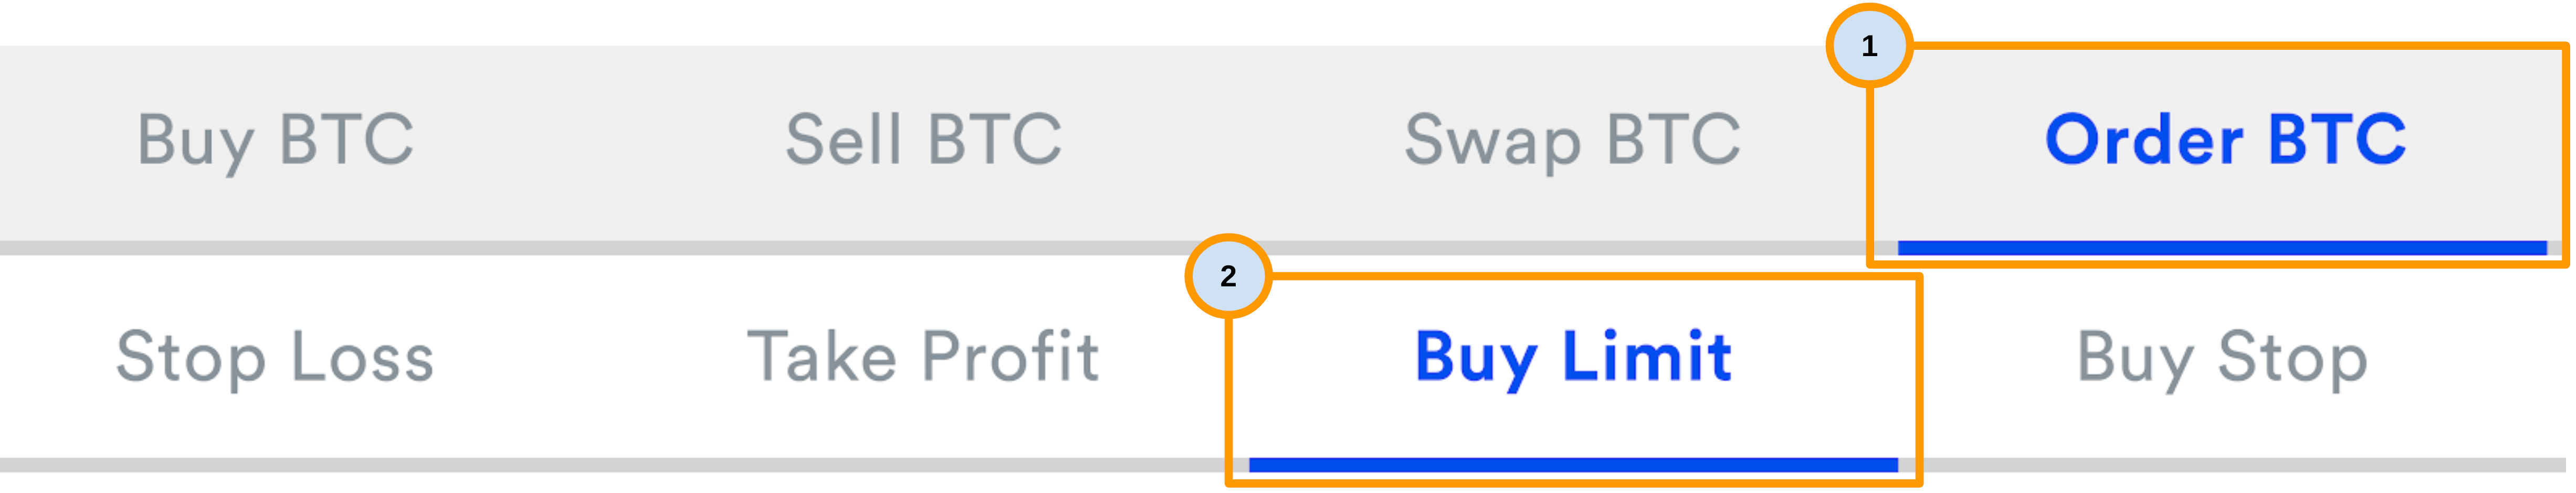 CoinSpot_Buy_Limit_Button_v2.png